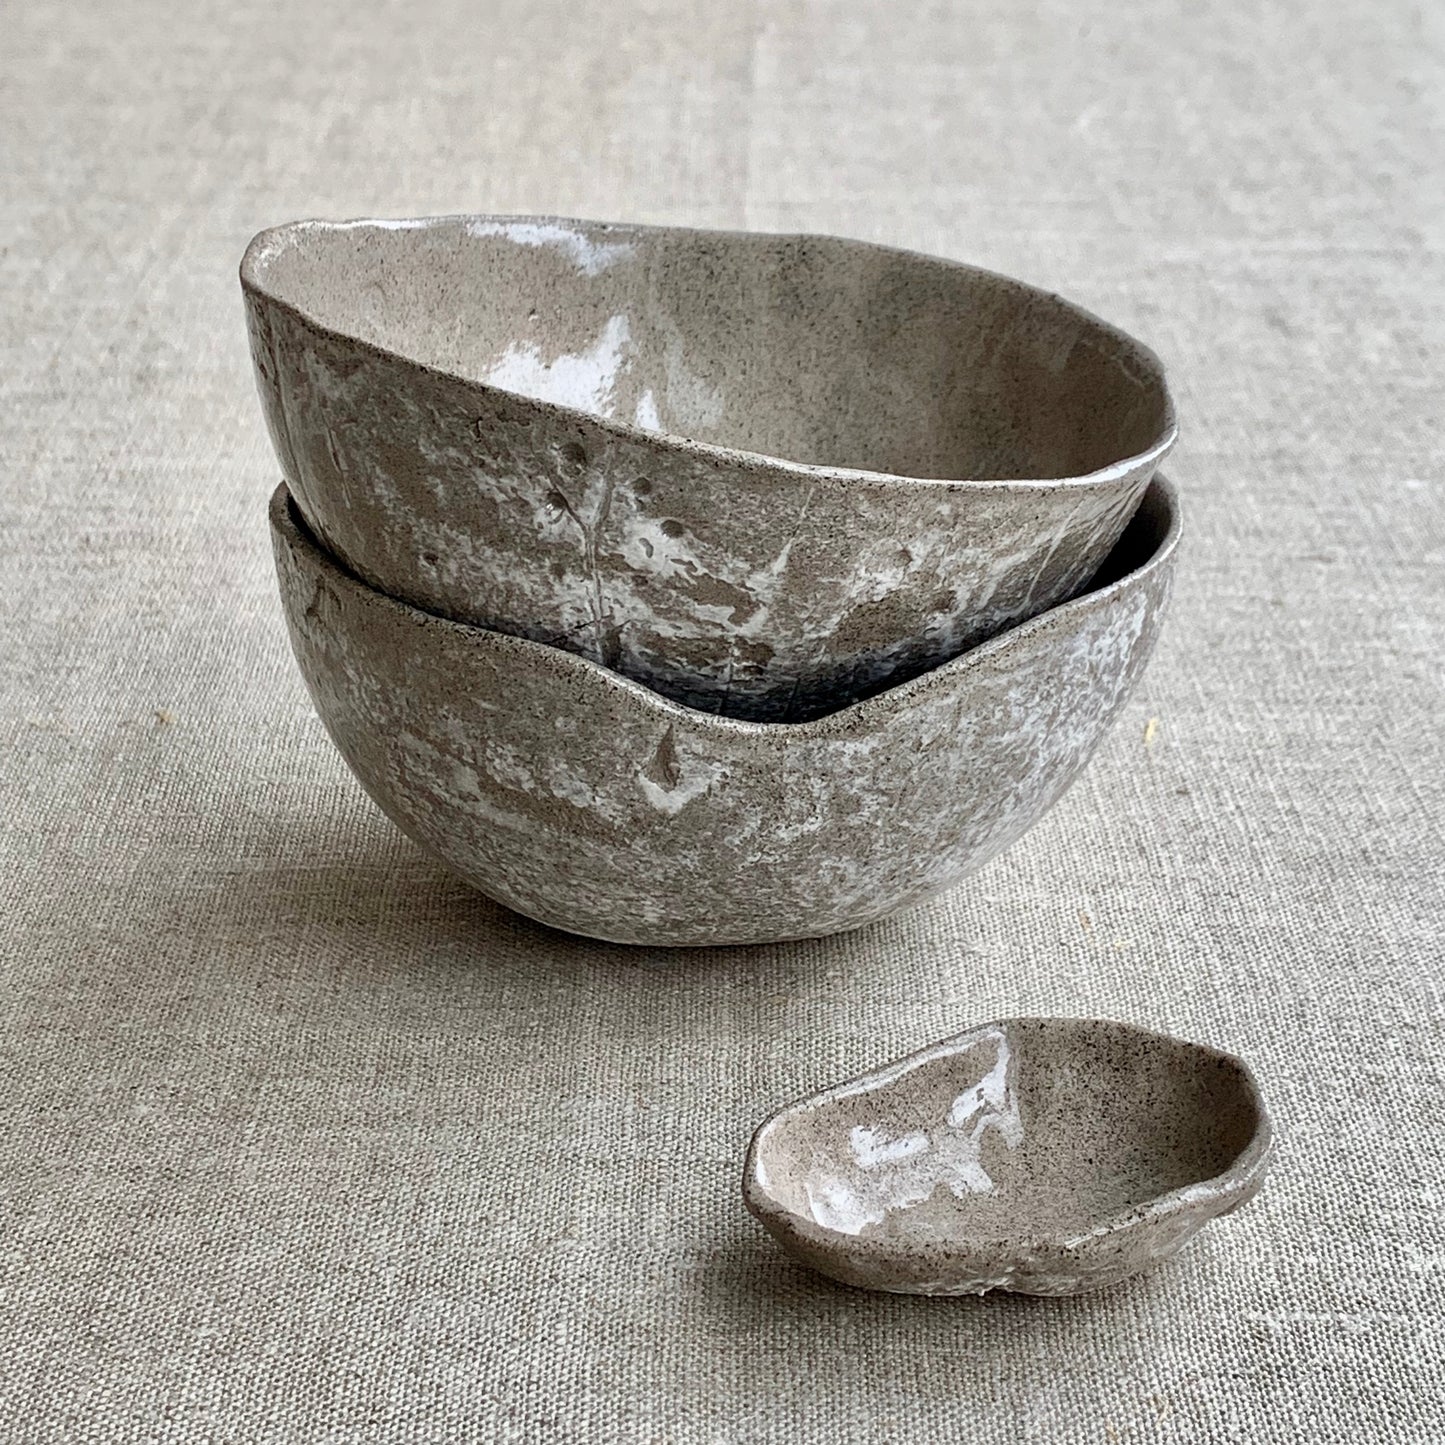 Unique handmade grey ceramic bowl from the Amazon collection. This medium bowl made of grey clay enriches your table setting with a deep warm feel or will surprise someone as a personal ceramic gift. A one of a kind signature piece of tableware with a unique design and white porcelain slib